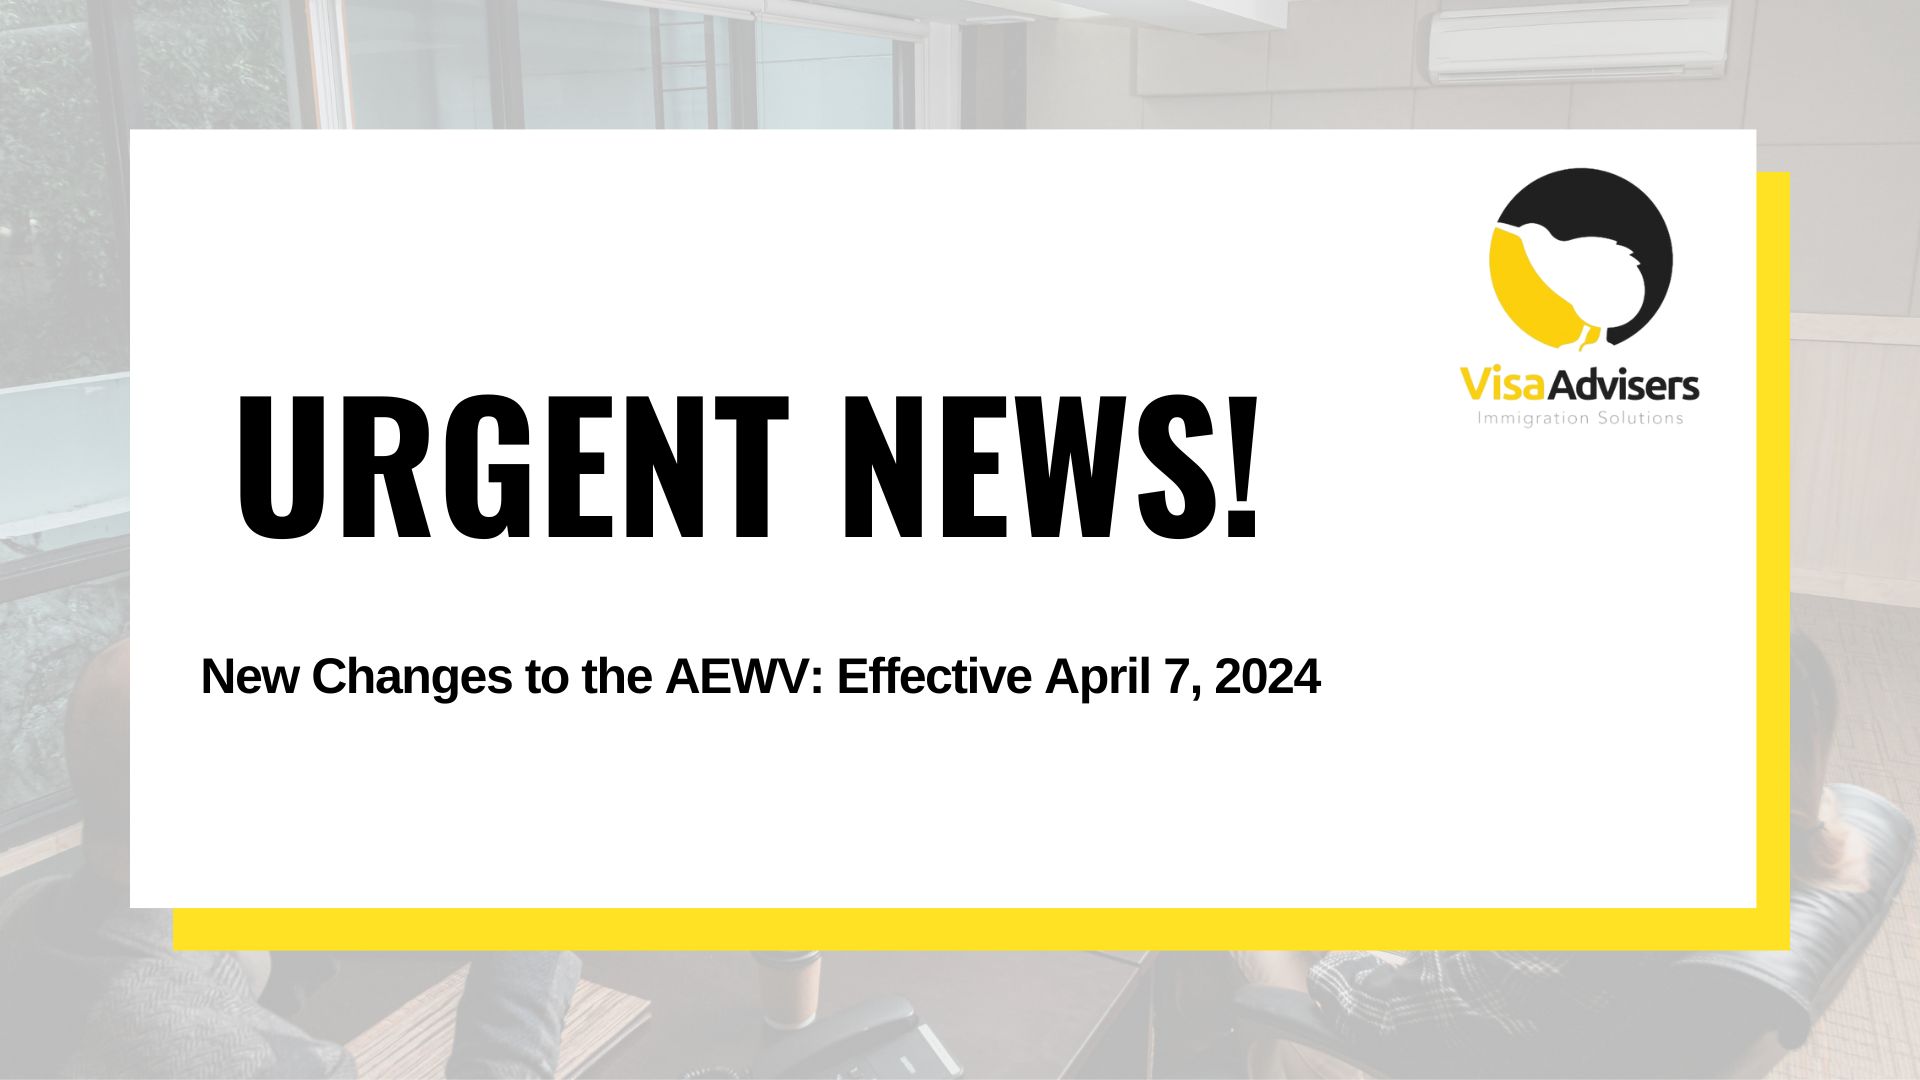 Banner with text: 'URGENT NEWS - New Changes to the AEWV Effective April 7, 2024.